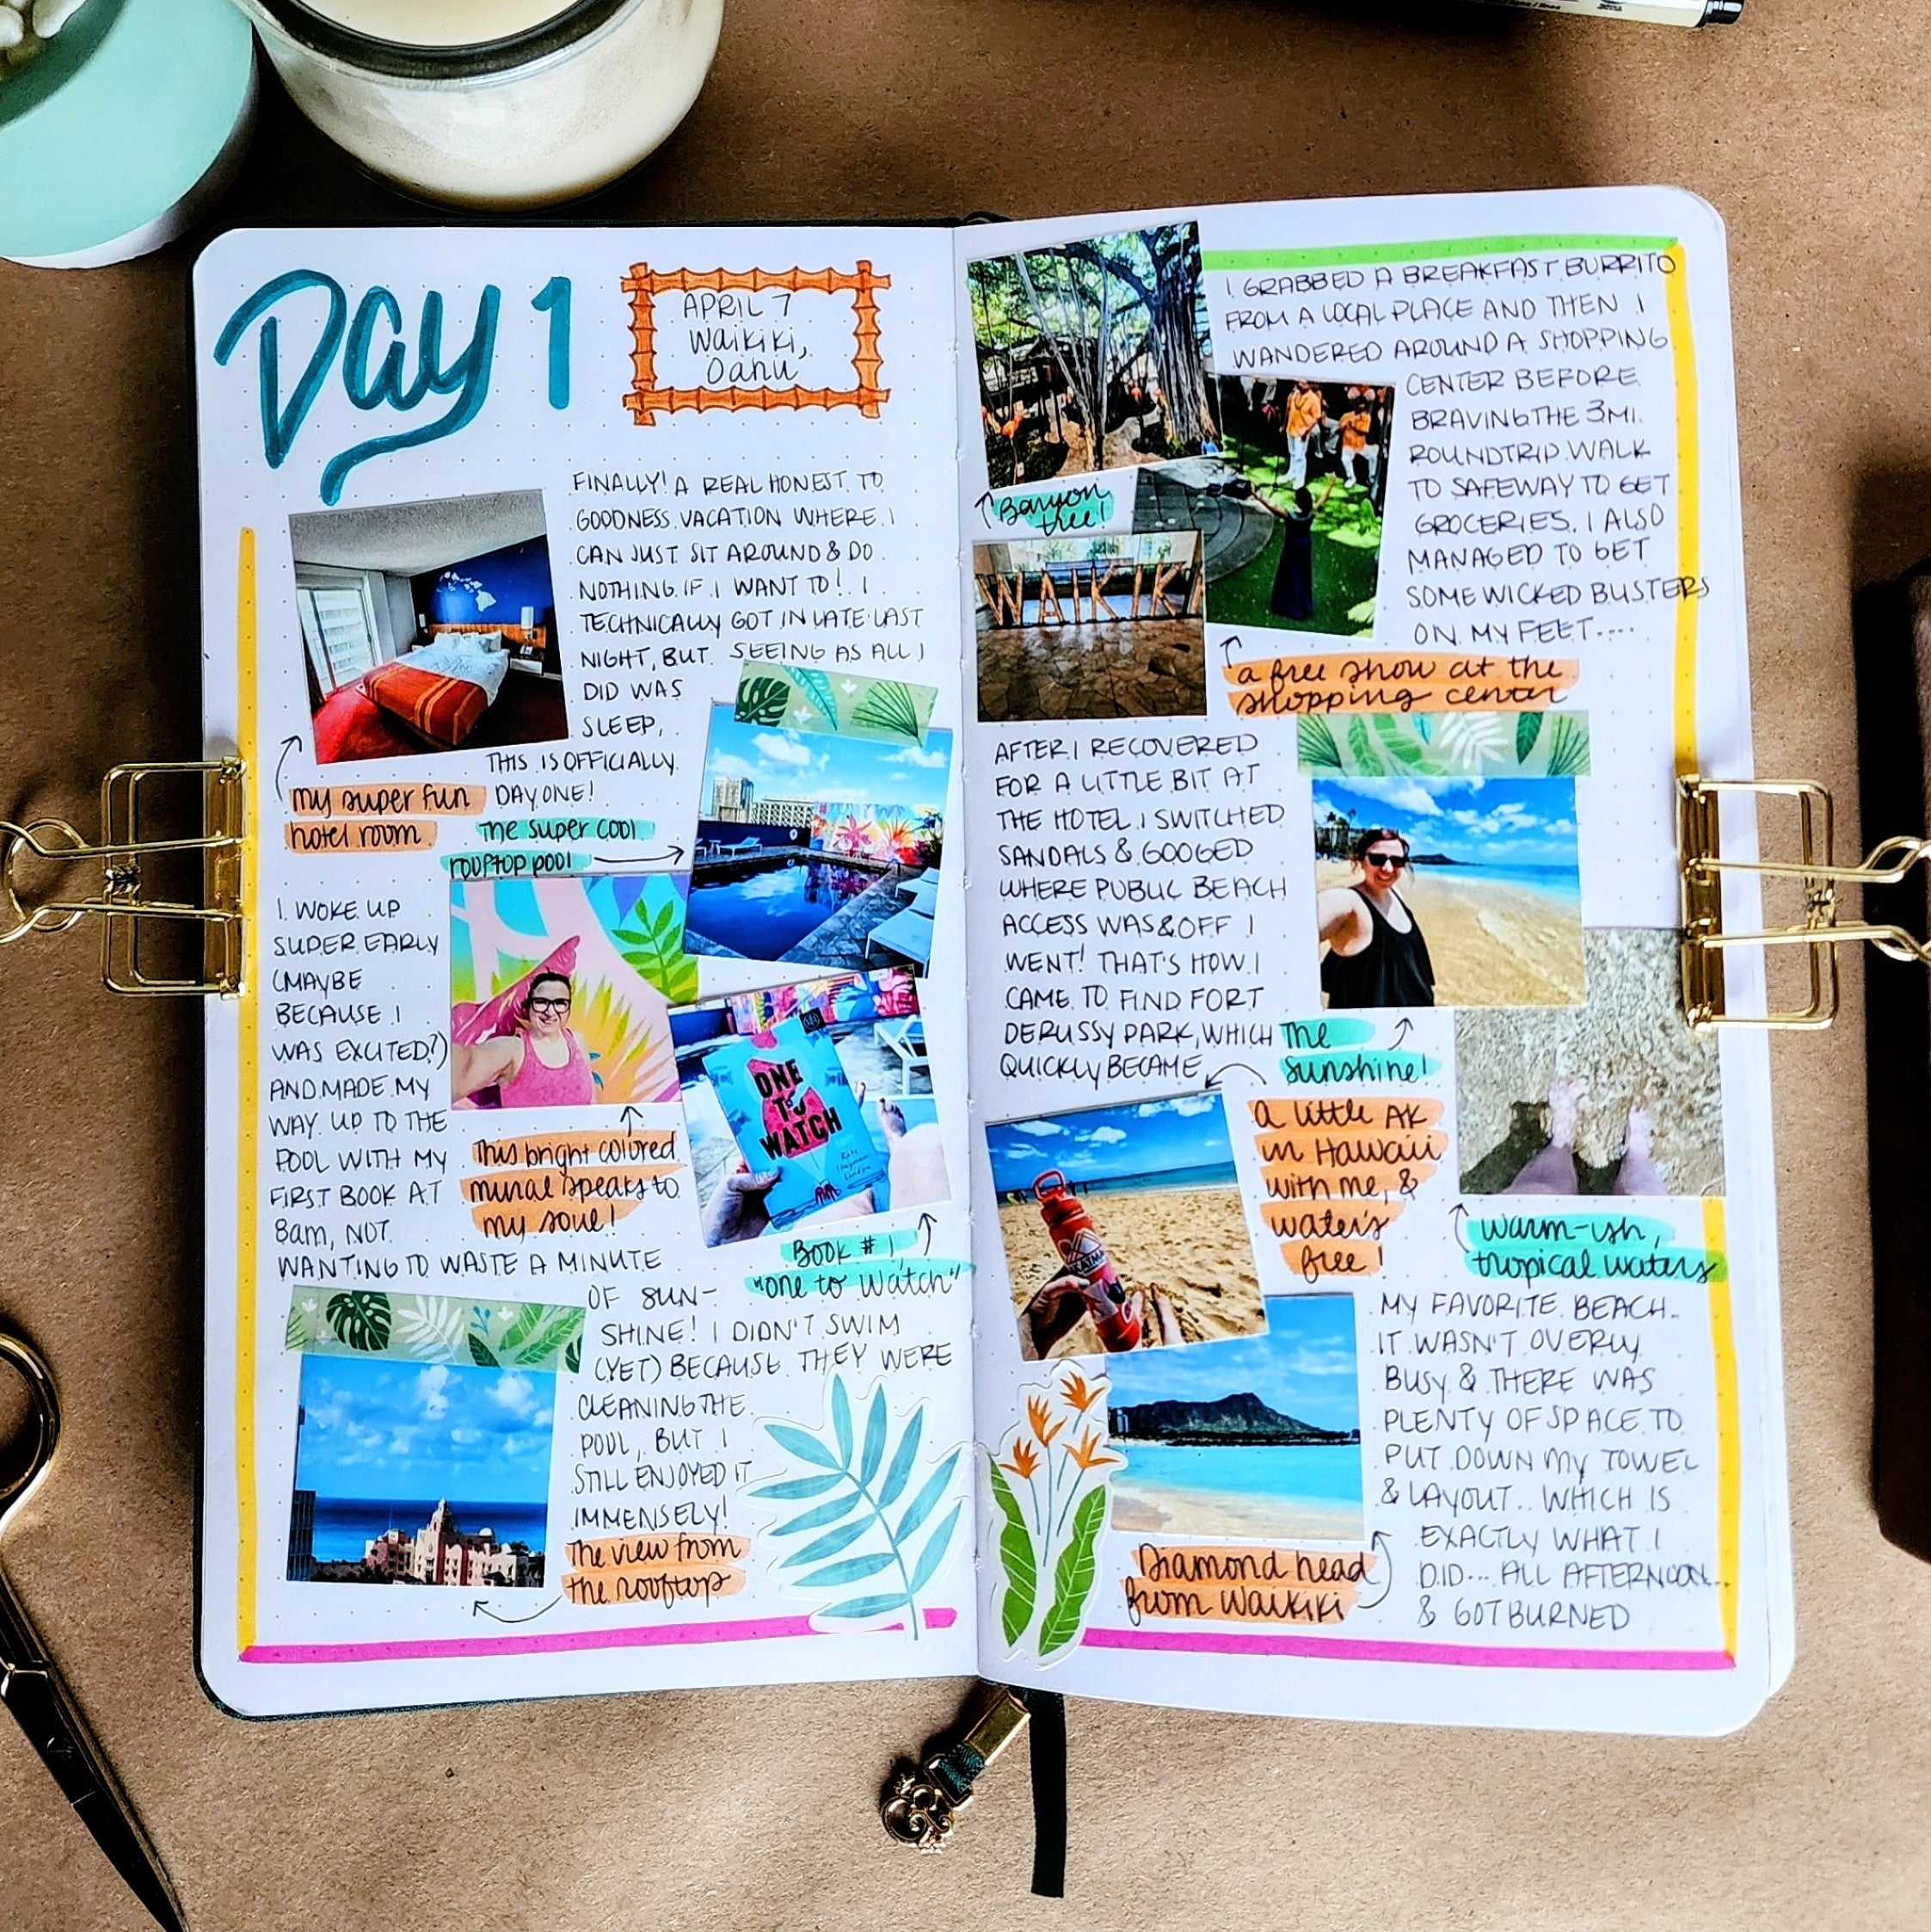 Travel journal ideas and inspiration. Techniques for keeping an